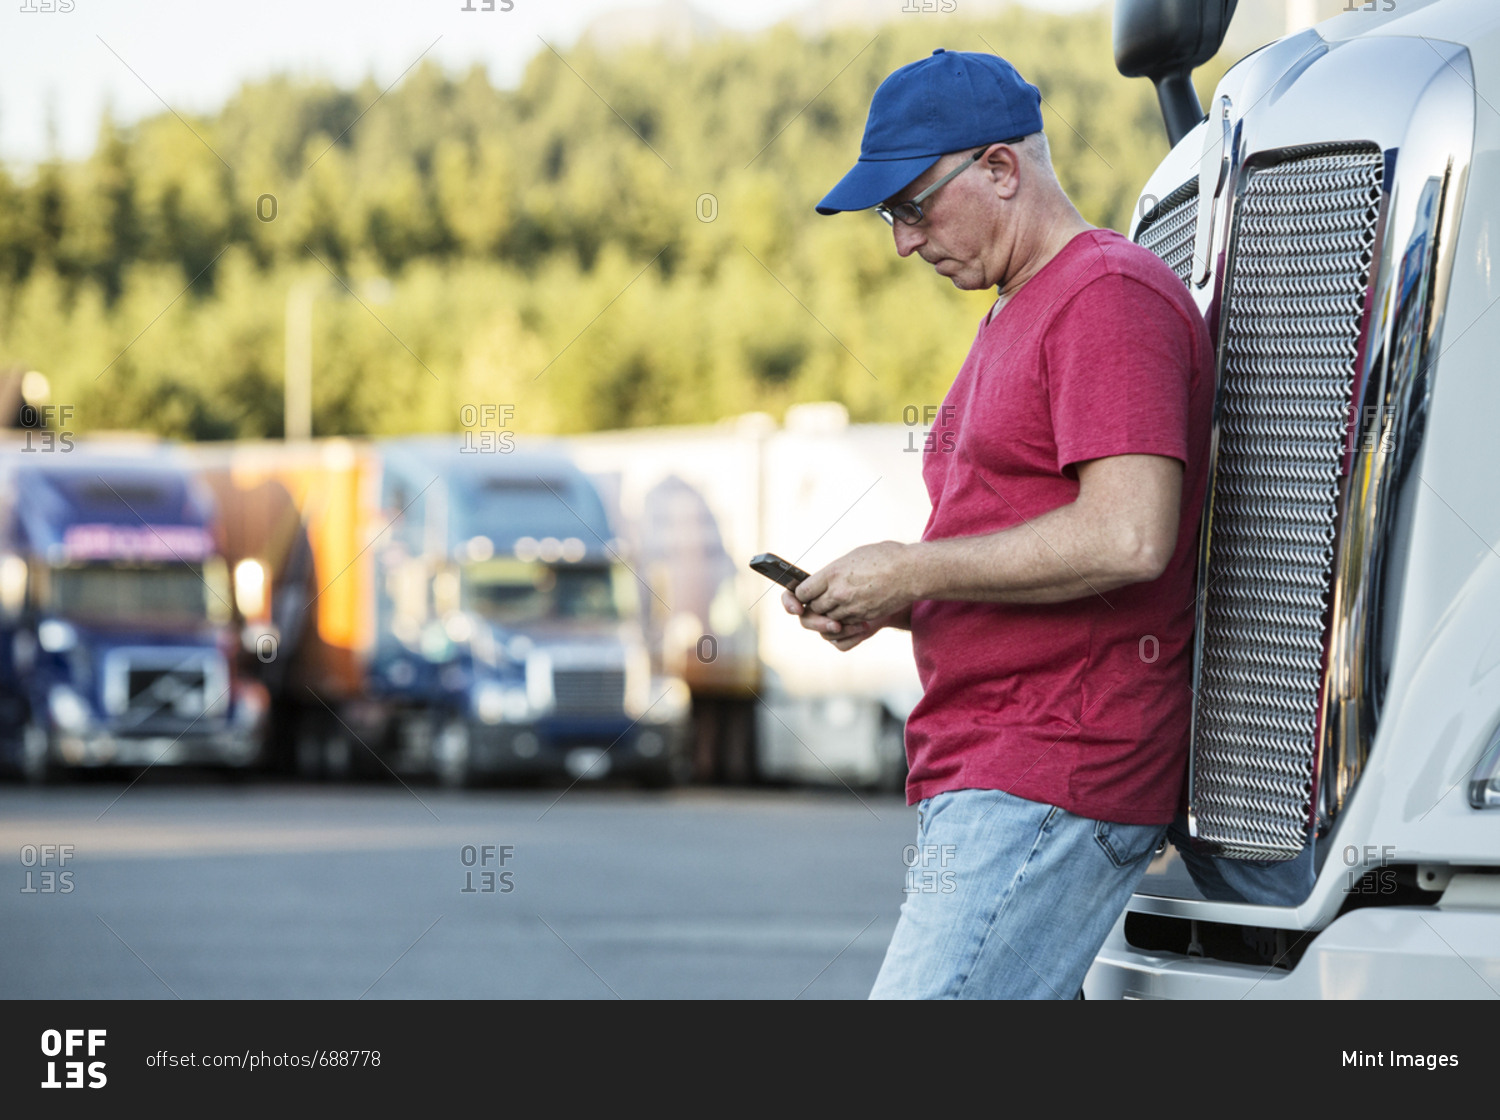 Caucasian man truck driver texting while standing next to the grill of his commercial truck in a struck stop